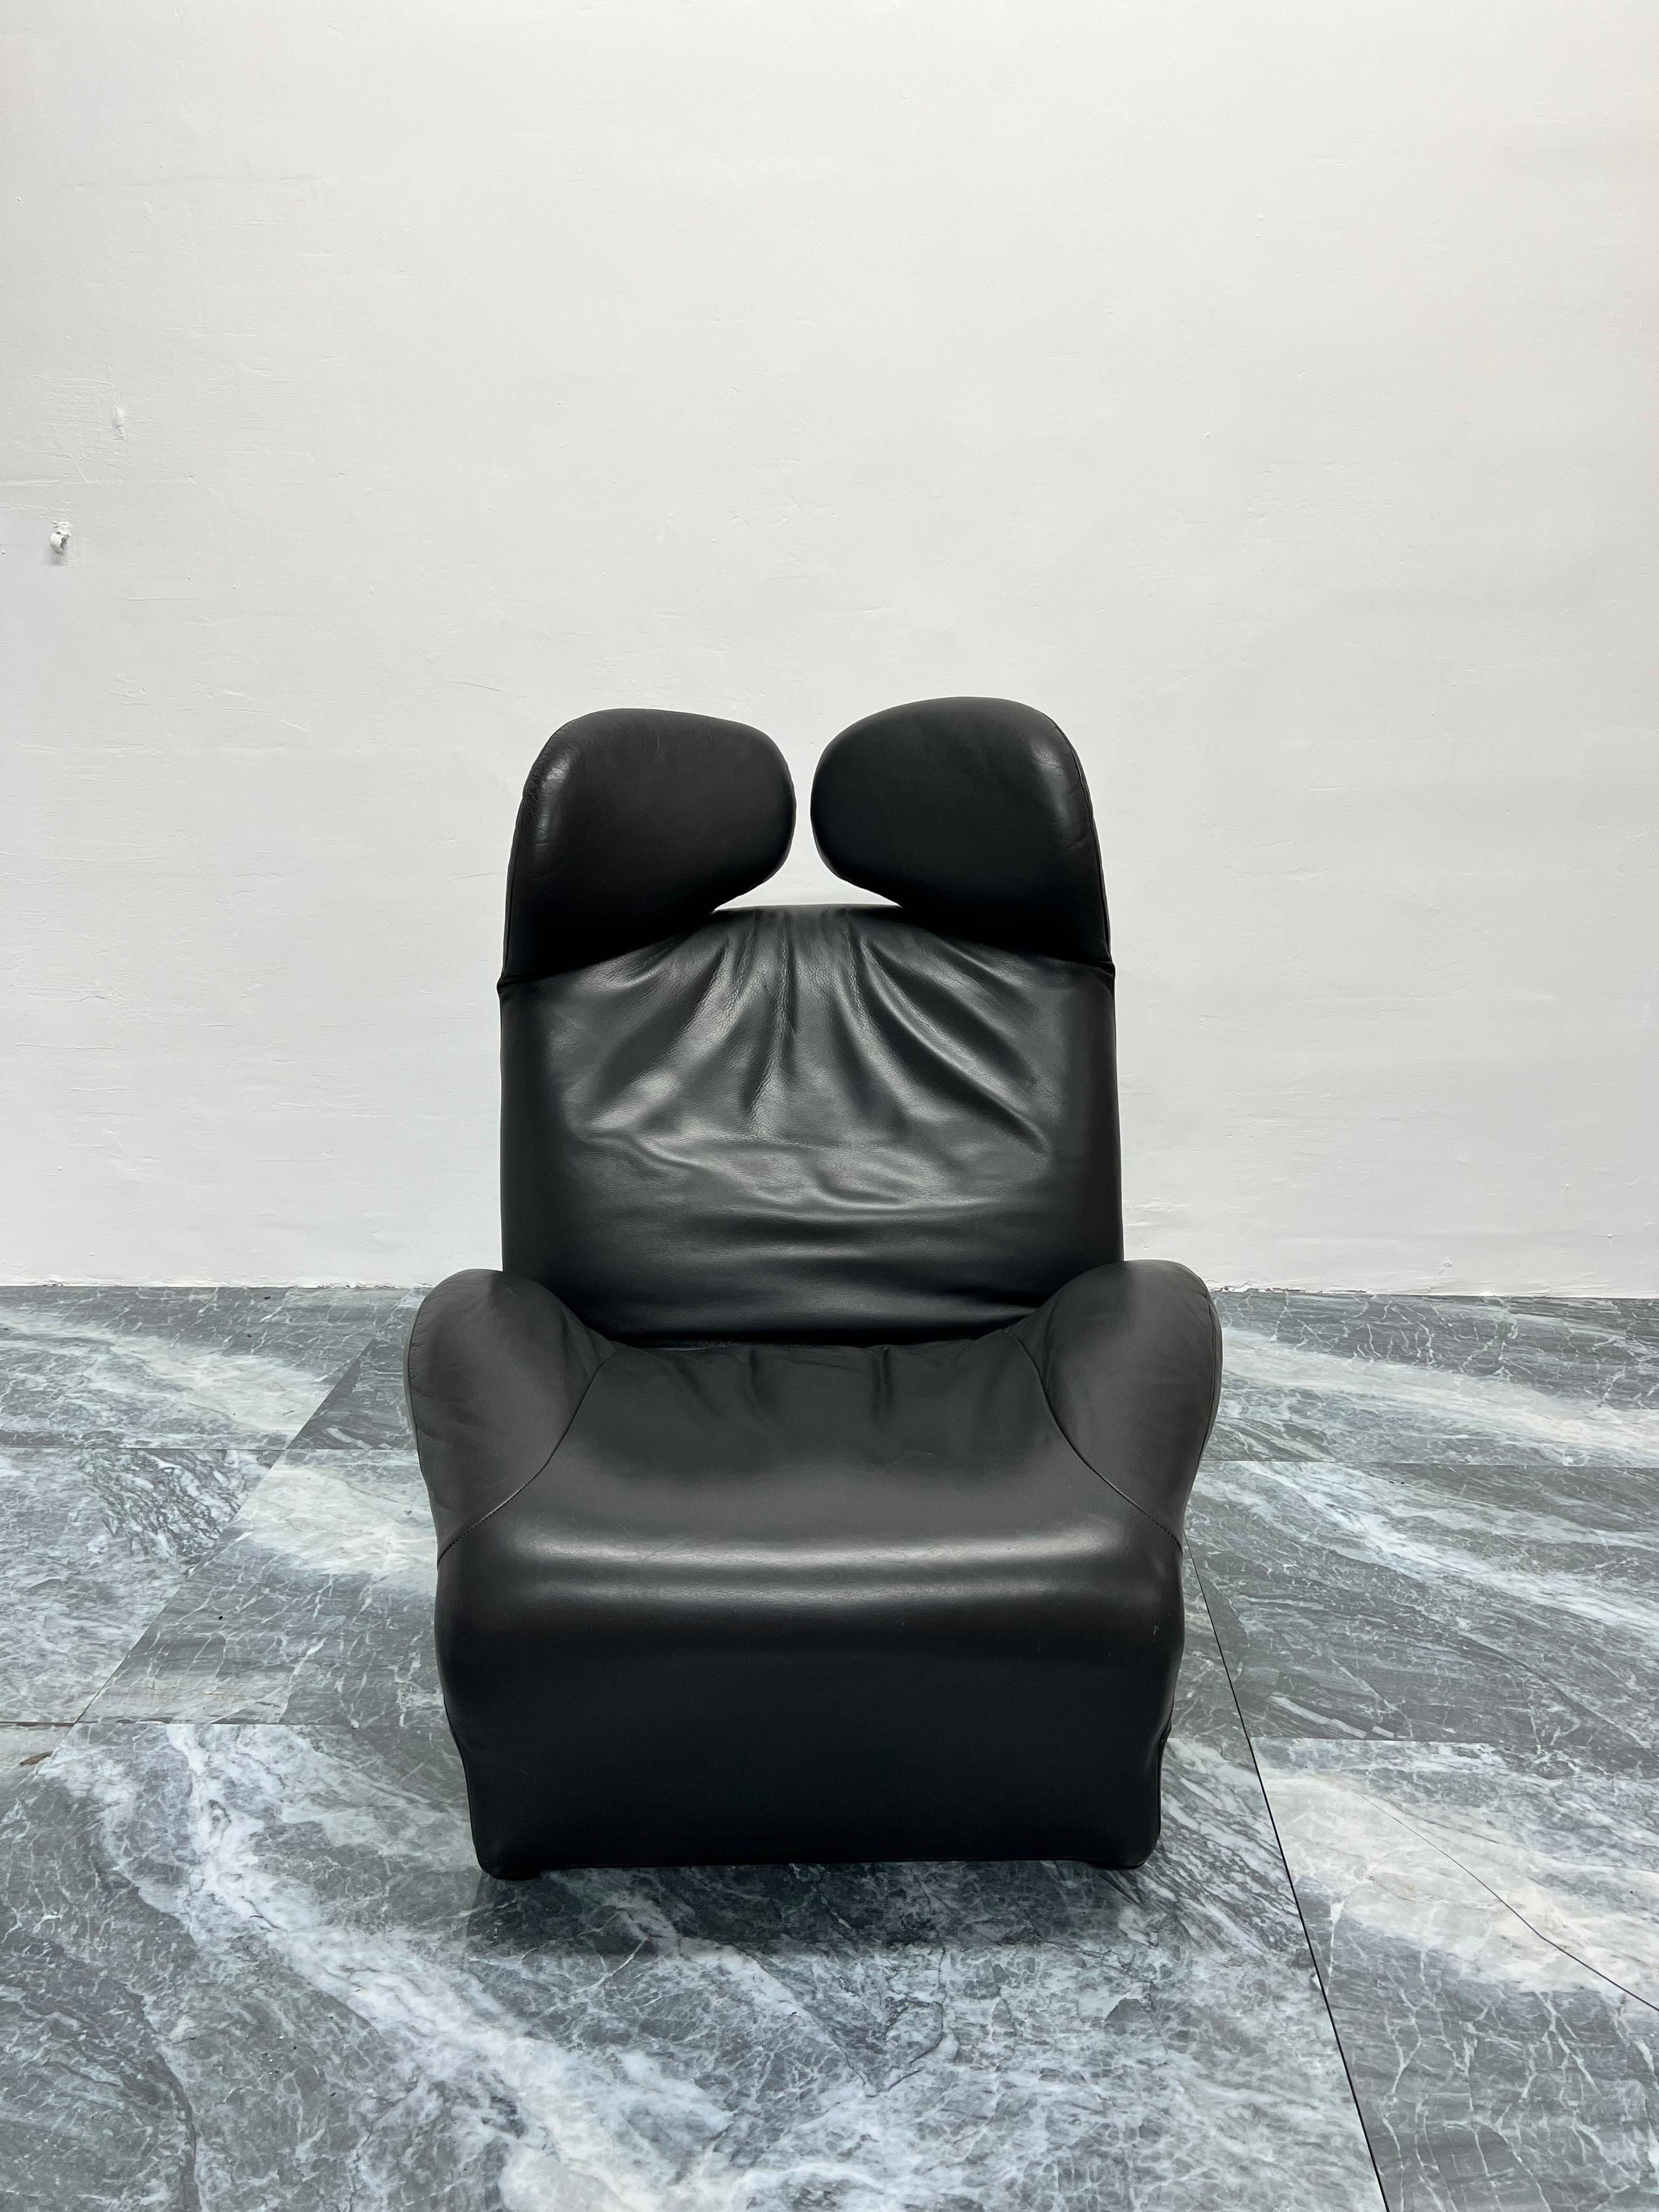 Charcoal gray leather Wink lounge chair designed by Toshiyuki Kita for Cassina, 1980s.

Wink rises out of the complex interweaving of Western ways and Asian influences, a versatile, eclectic design armchair that, by folding its base, becomes a